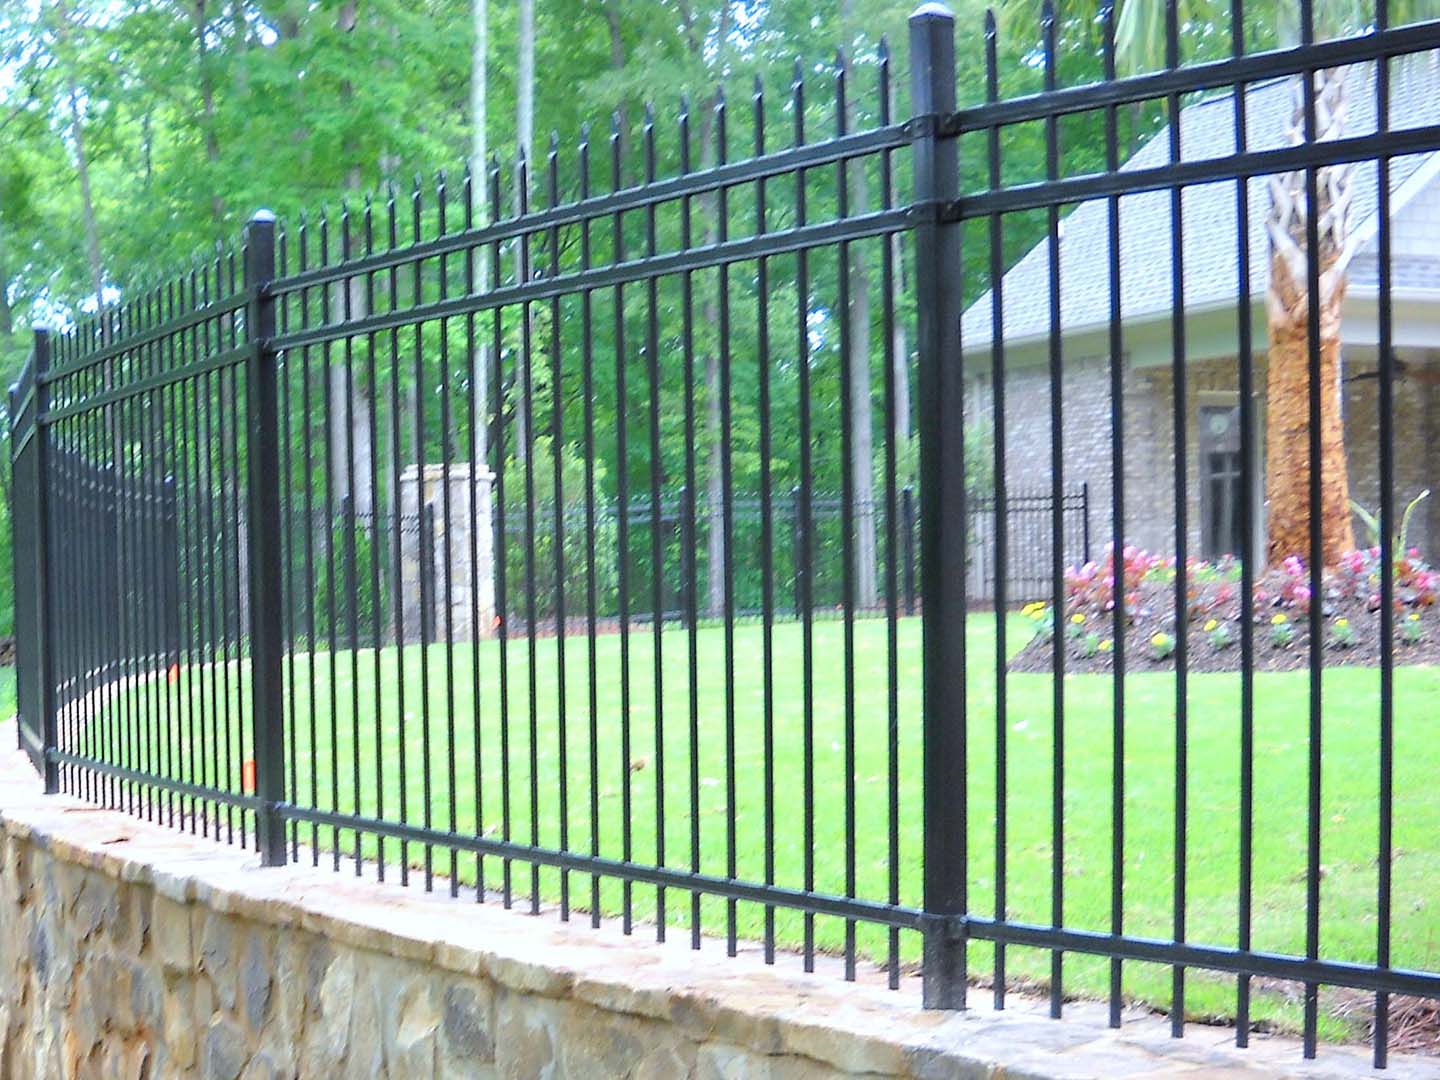 Alpharetta Georgia residential and commercial fencing